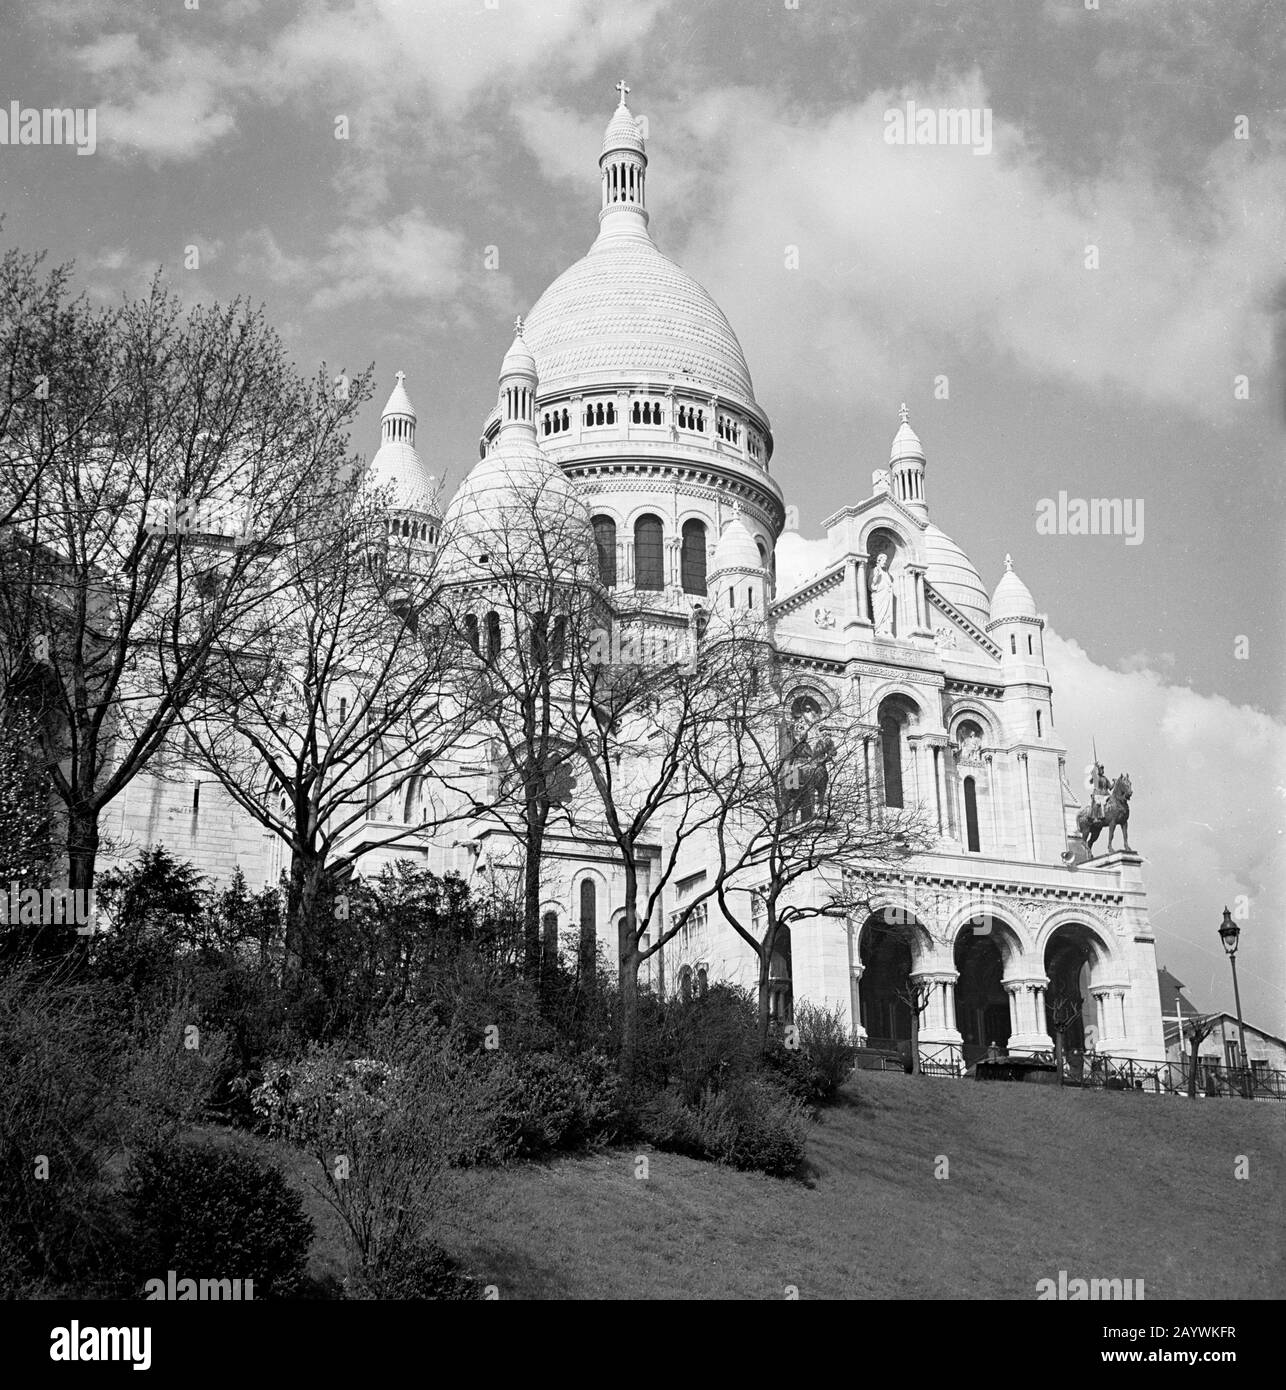 1950s, historical view of the parisian landmark of Sacre-Coeur, Paris, France, a domed roman catholic church, consecrated in 1919 and one of the most inconic monuments in the French city, which sits on a hilly peak in the district of Montmartre. Stock Photo